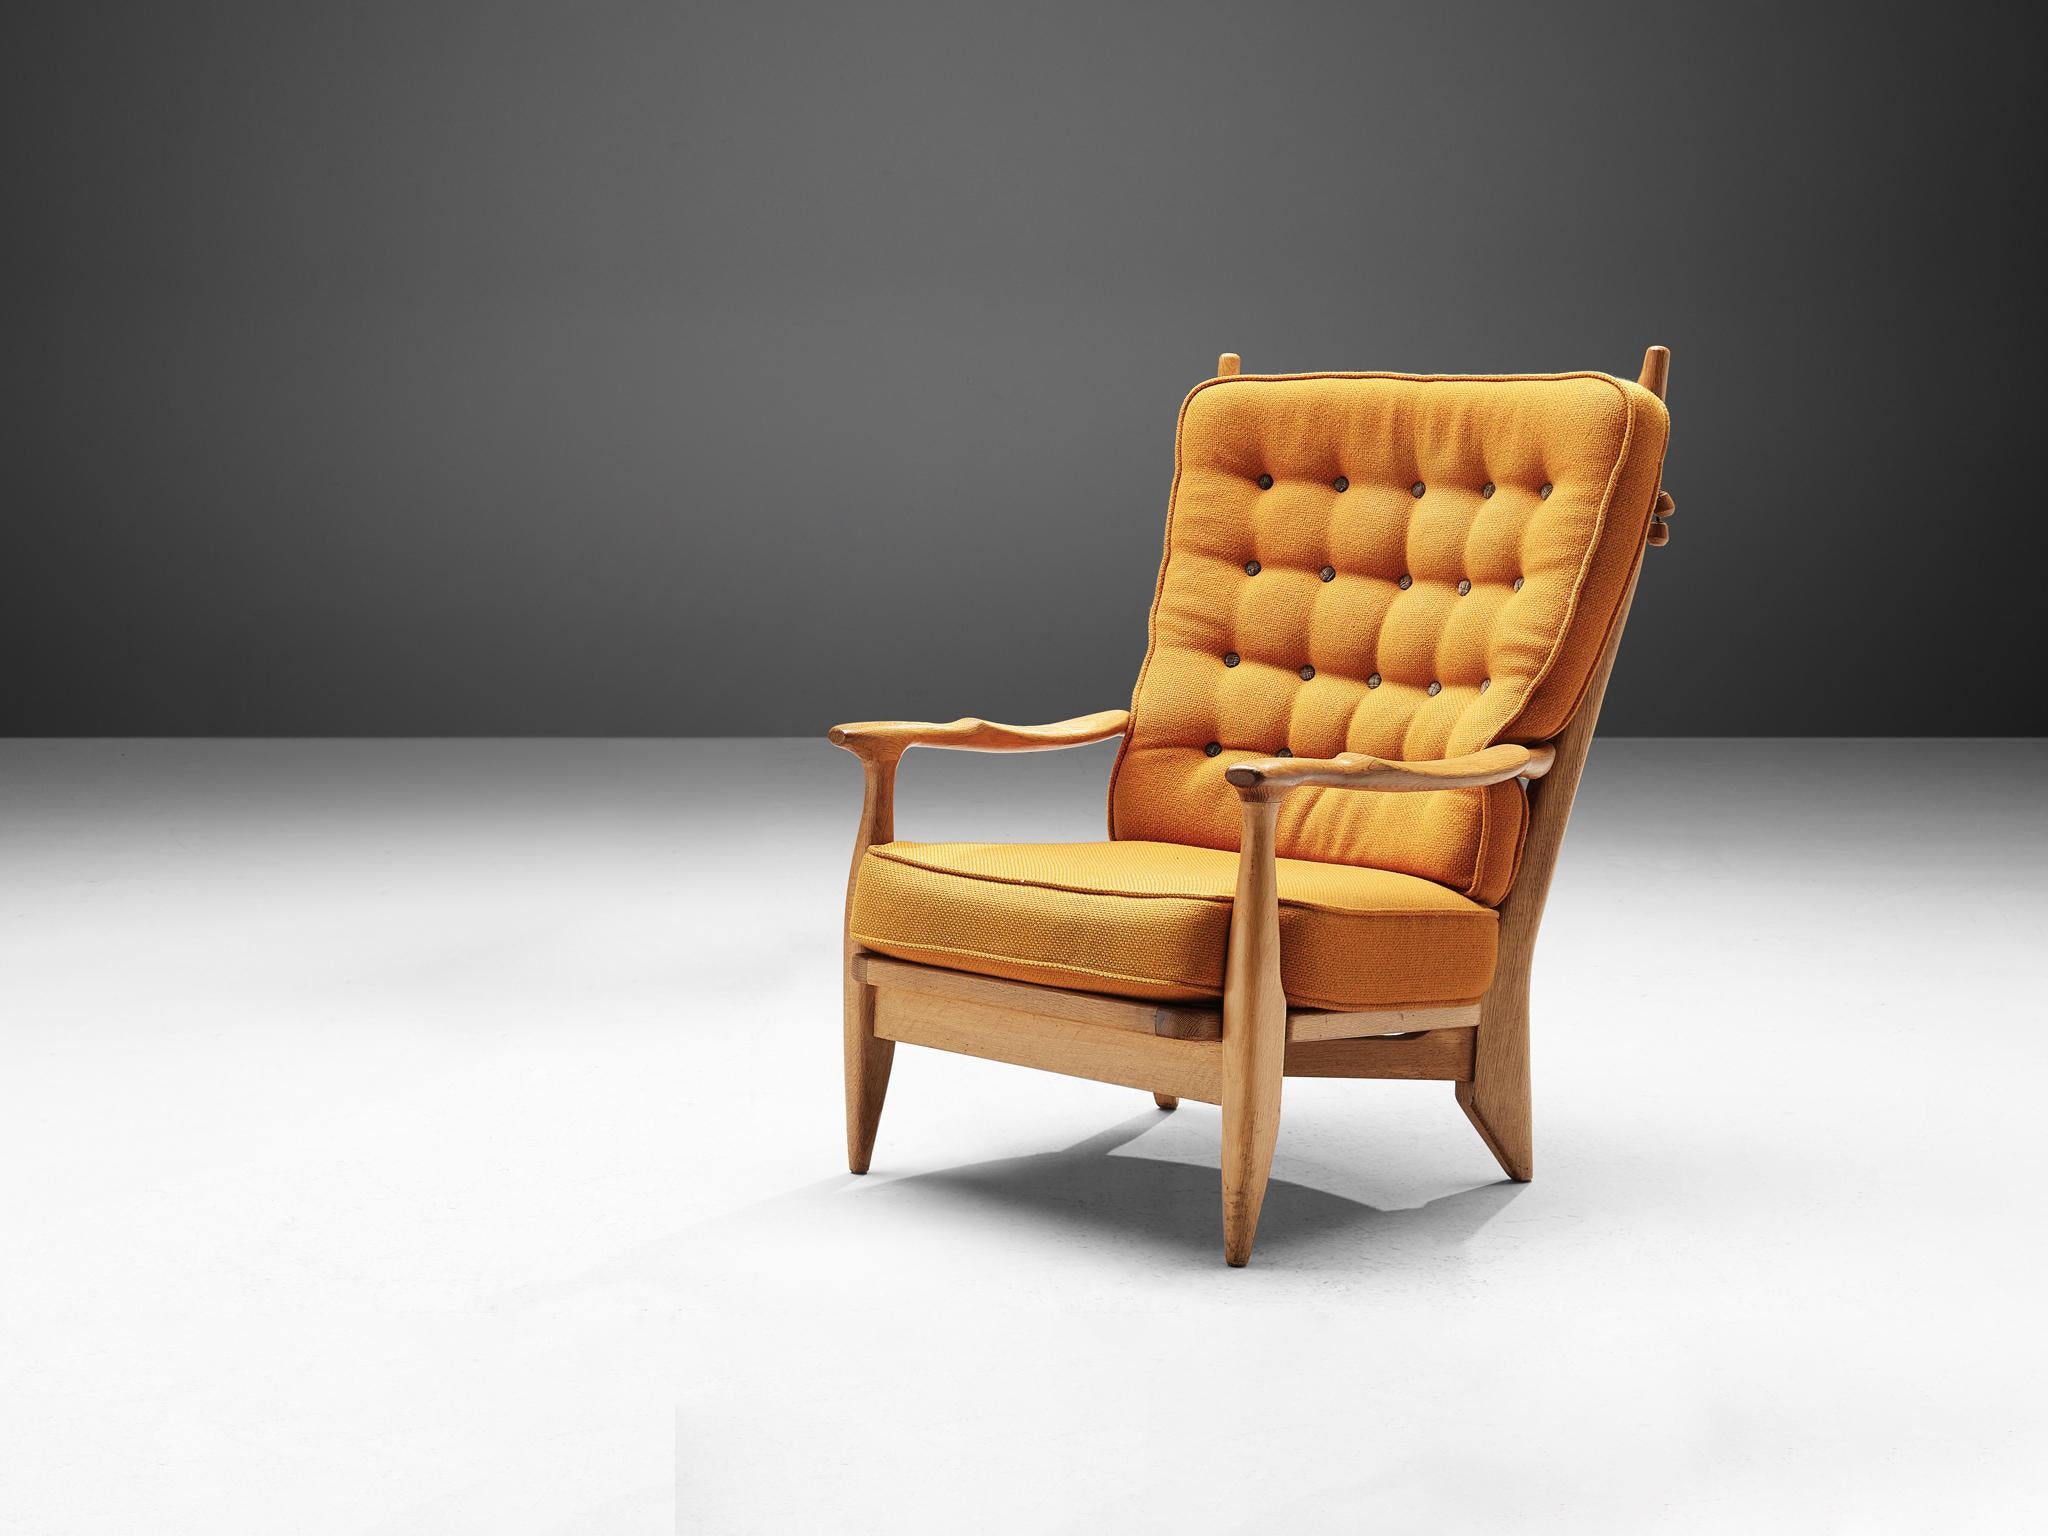 Guillerme & Chambron Lounge Chair in Oak and Ocher Yellow Upholstery